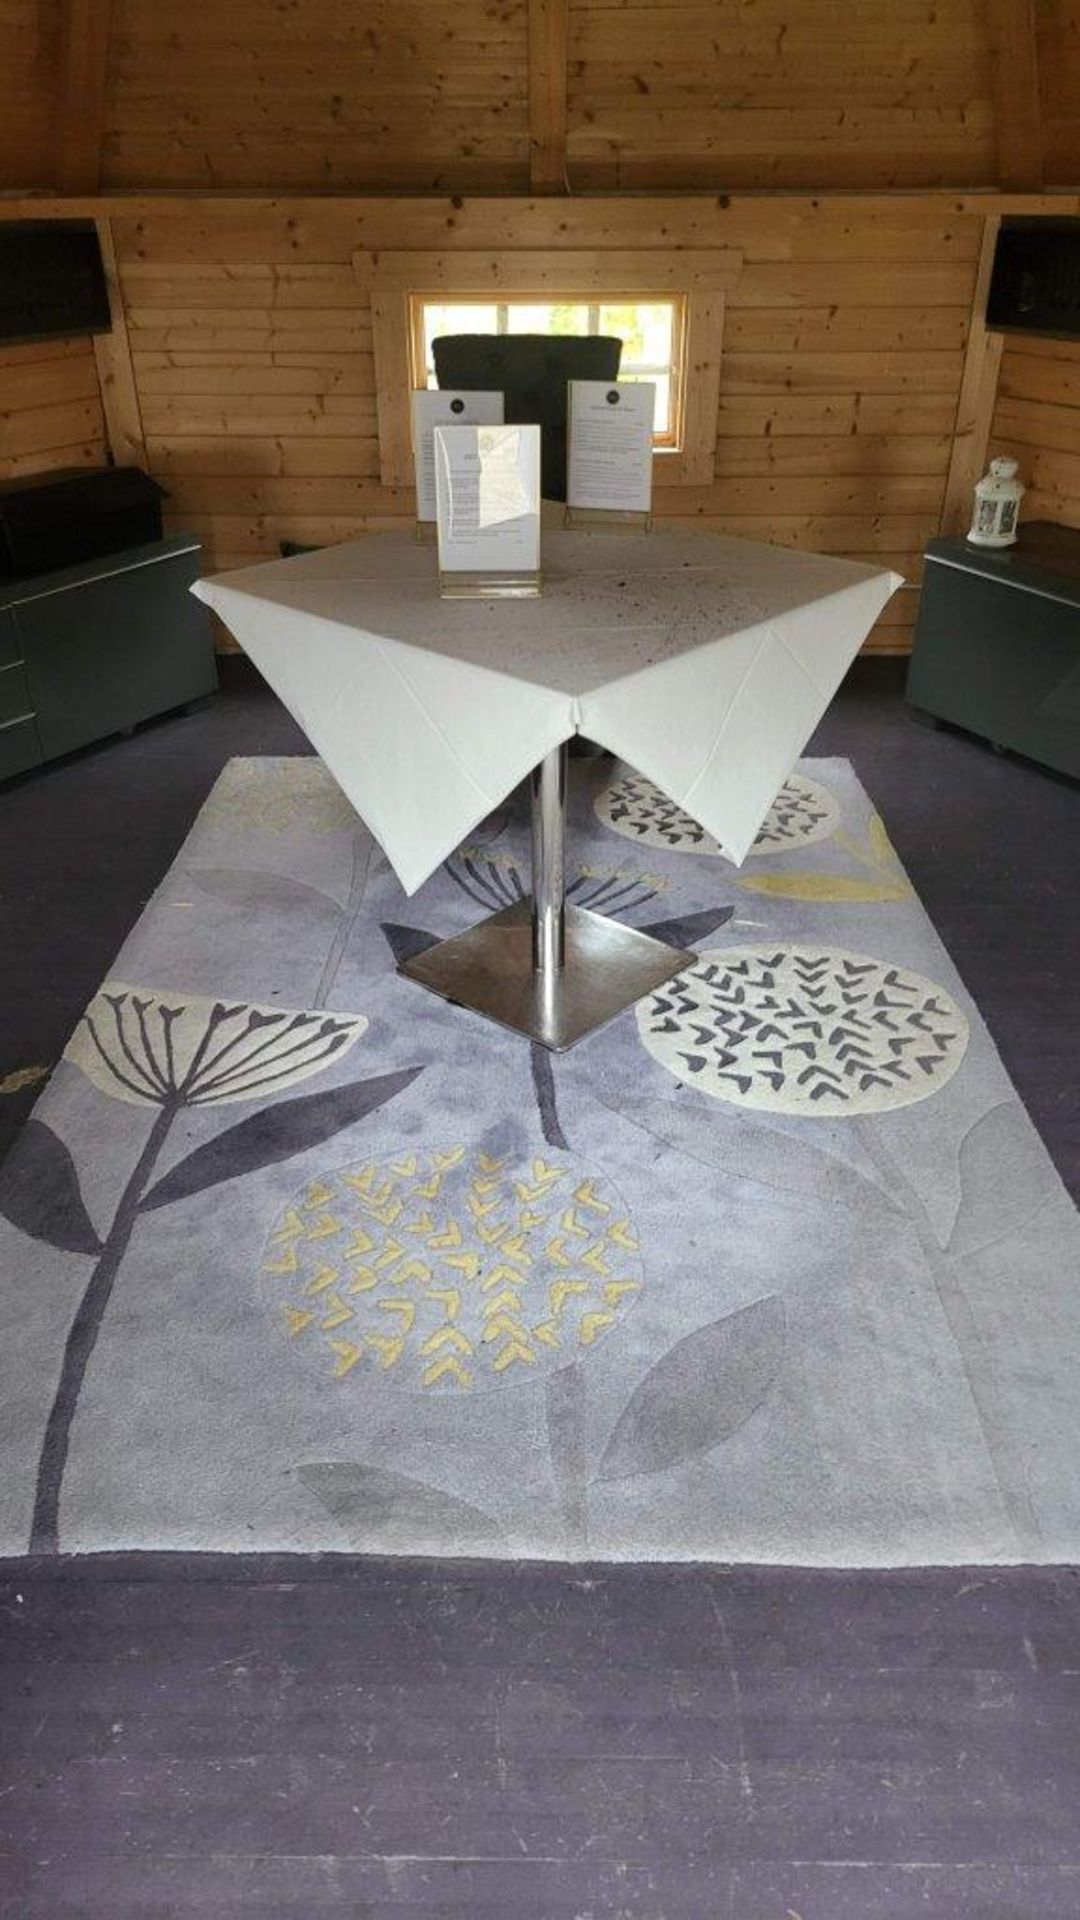 Glass Topped Square Table with Floral Design Rug - Image 2 of 2